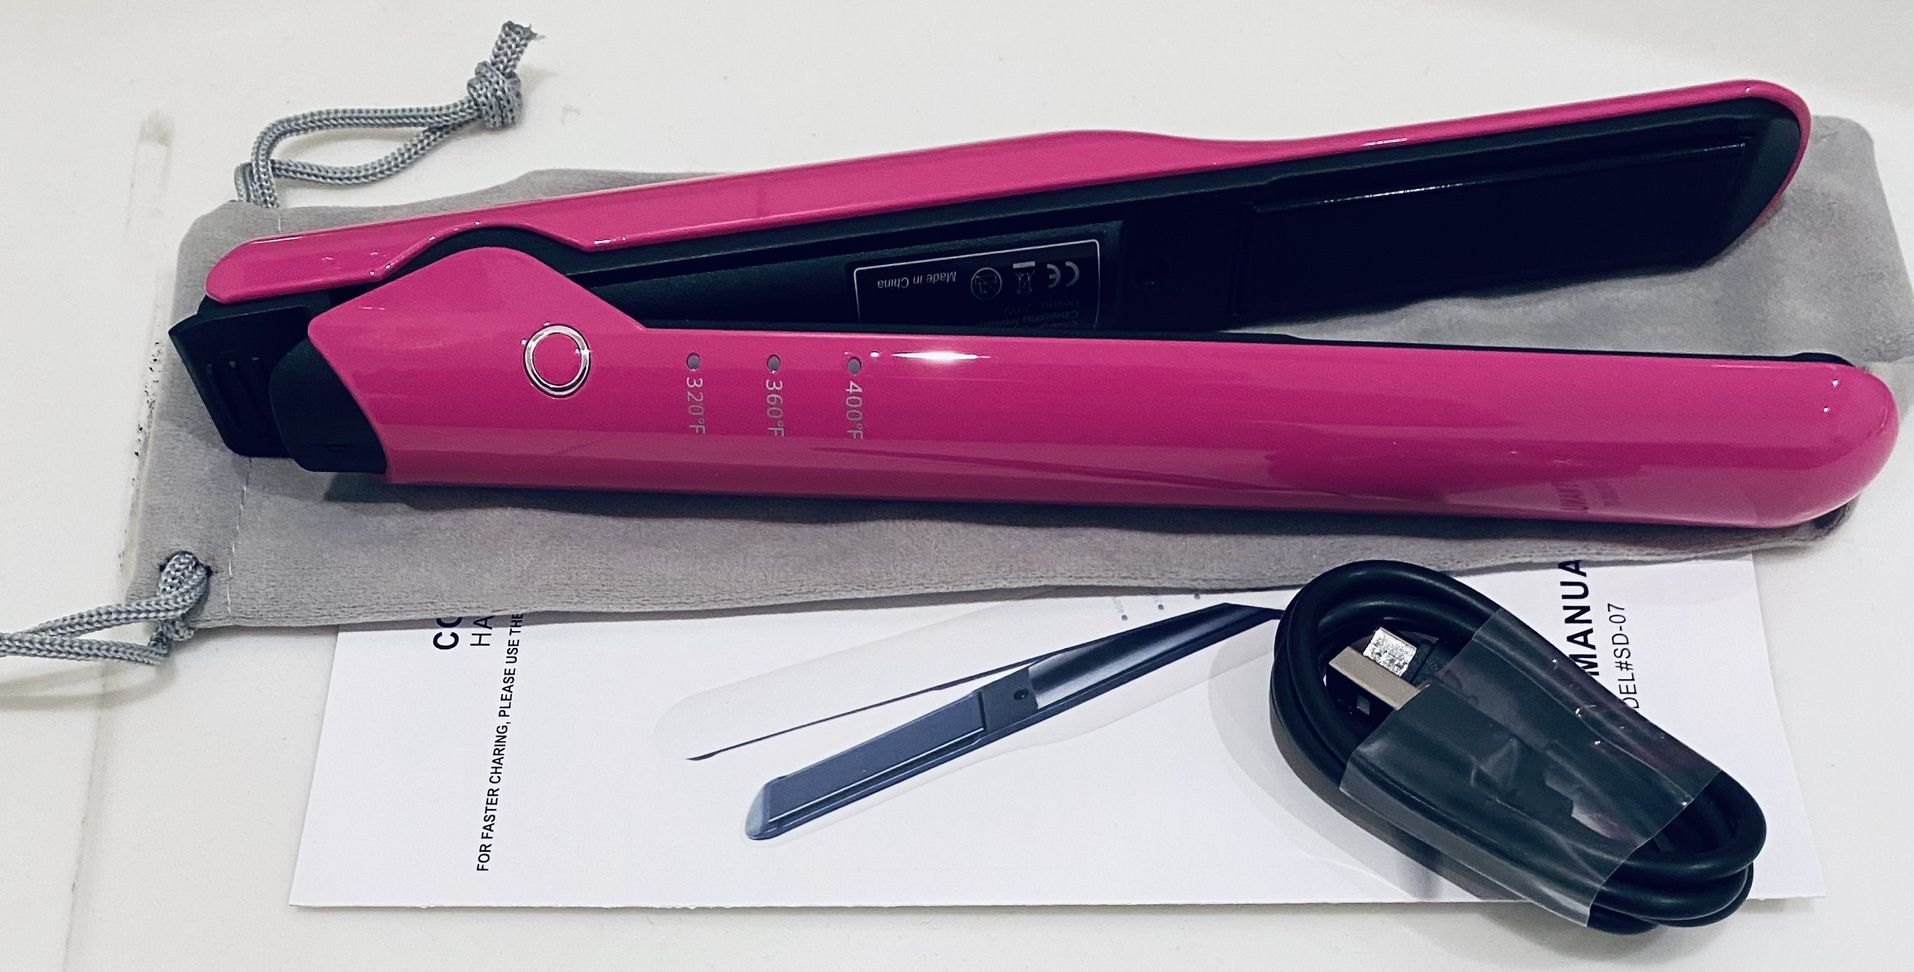 Cordless rechargeable flat iron hair straightener. (Cordless rechargeable straightening brush also available) Only measures 8.5” in length making it e